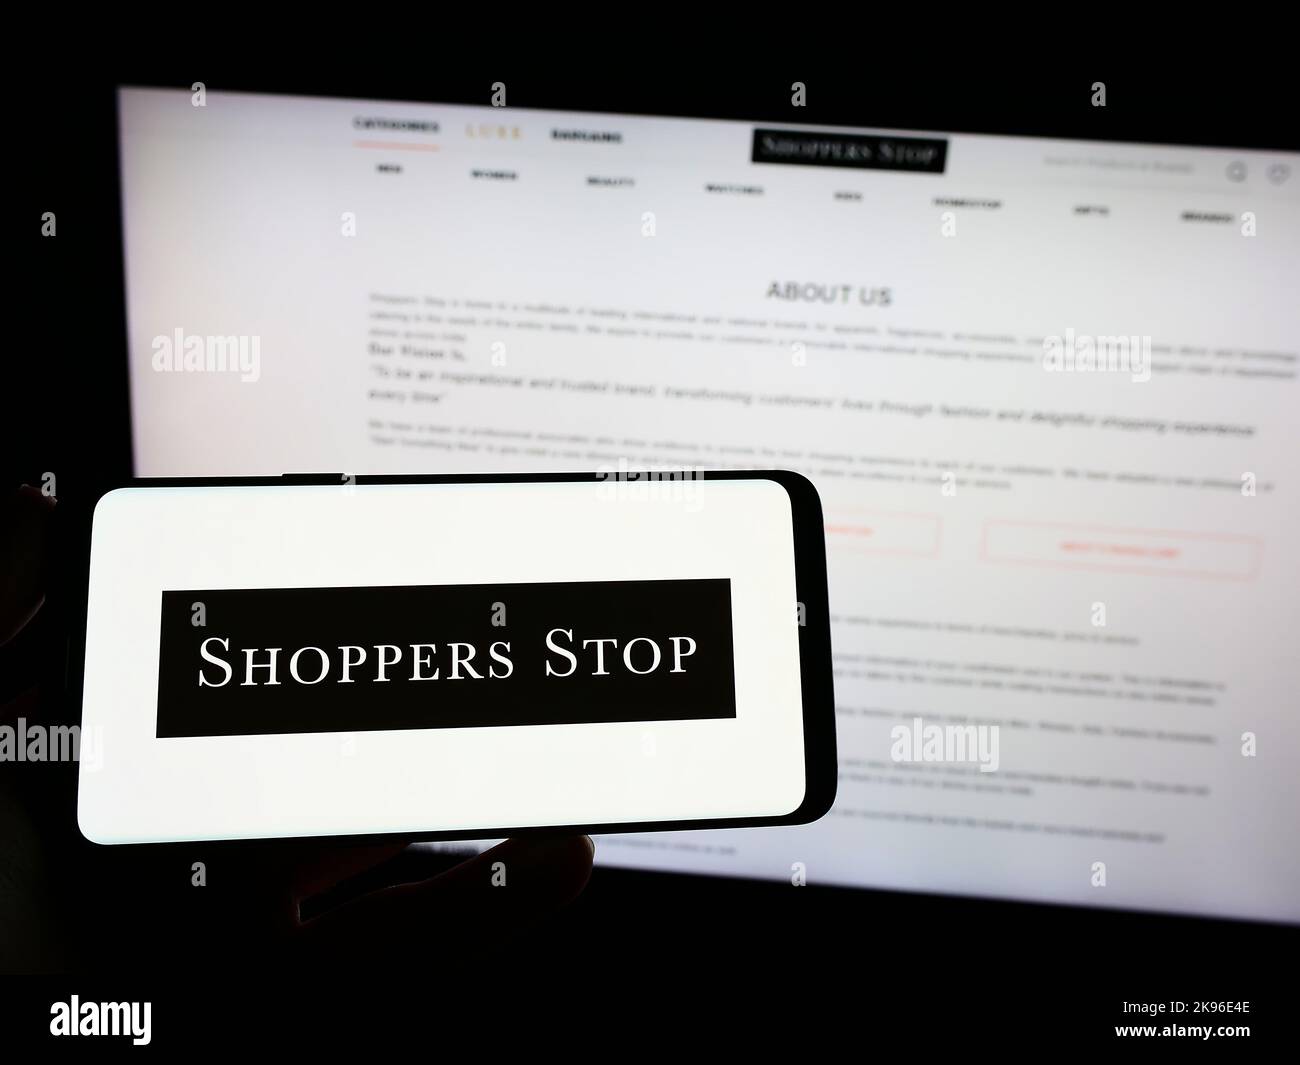 Person holding mobile phone with logo of Indian retail company Shoppers Stop Limited on screen in front of web page. Focus on phone display. Stock Photo